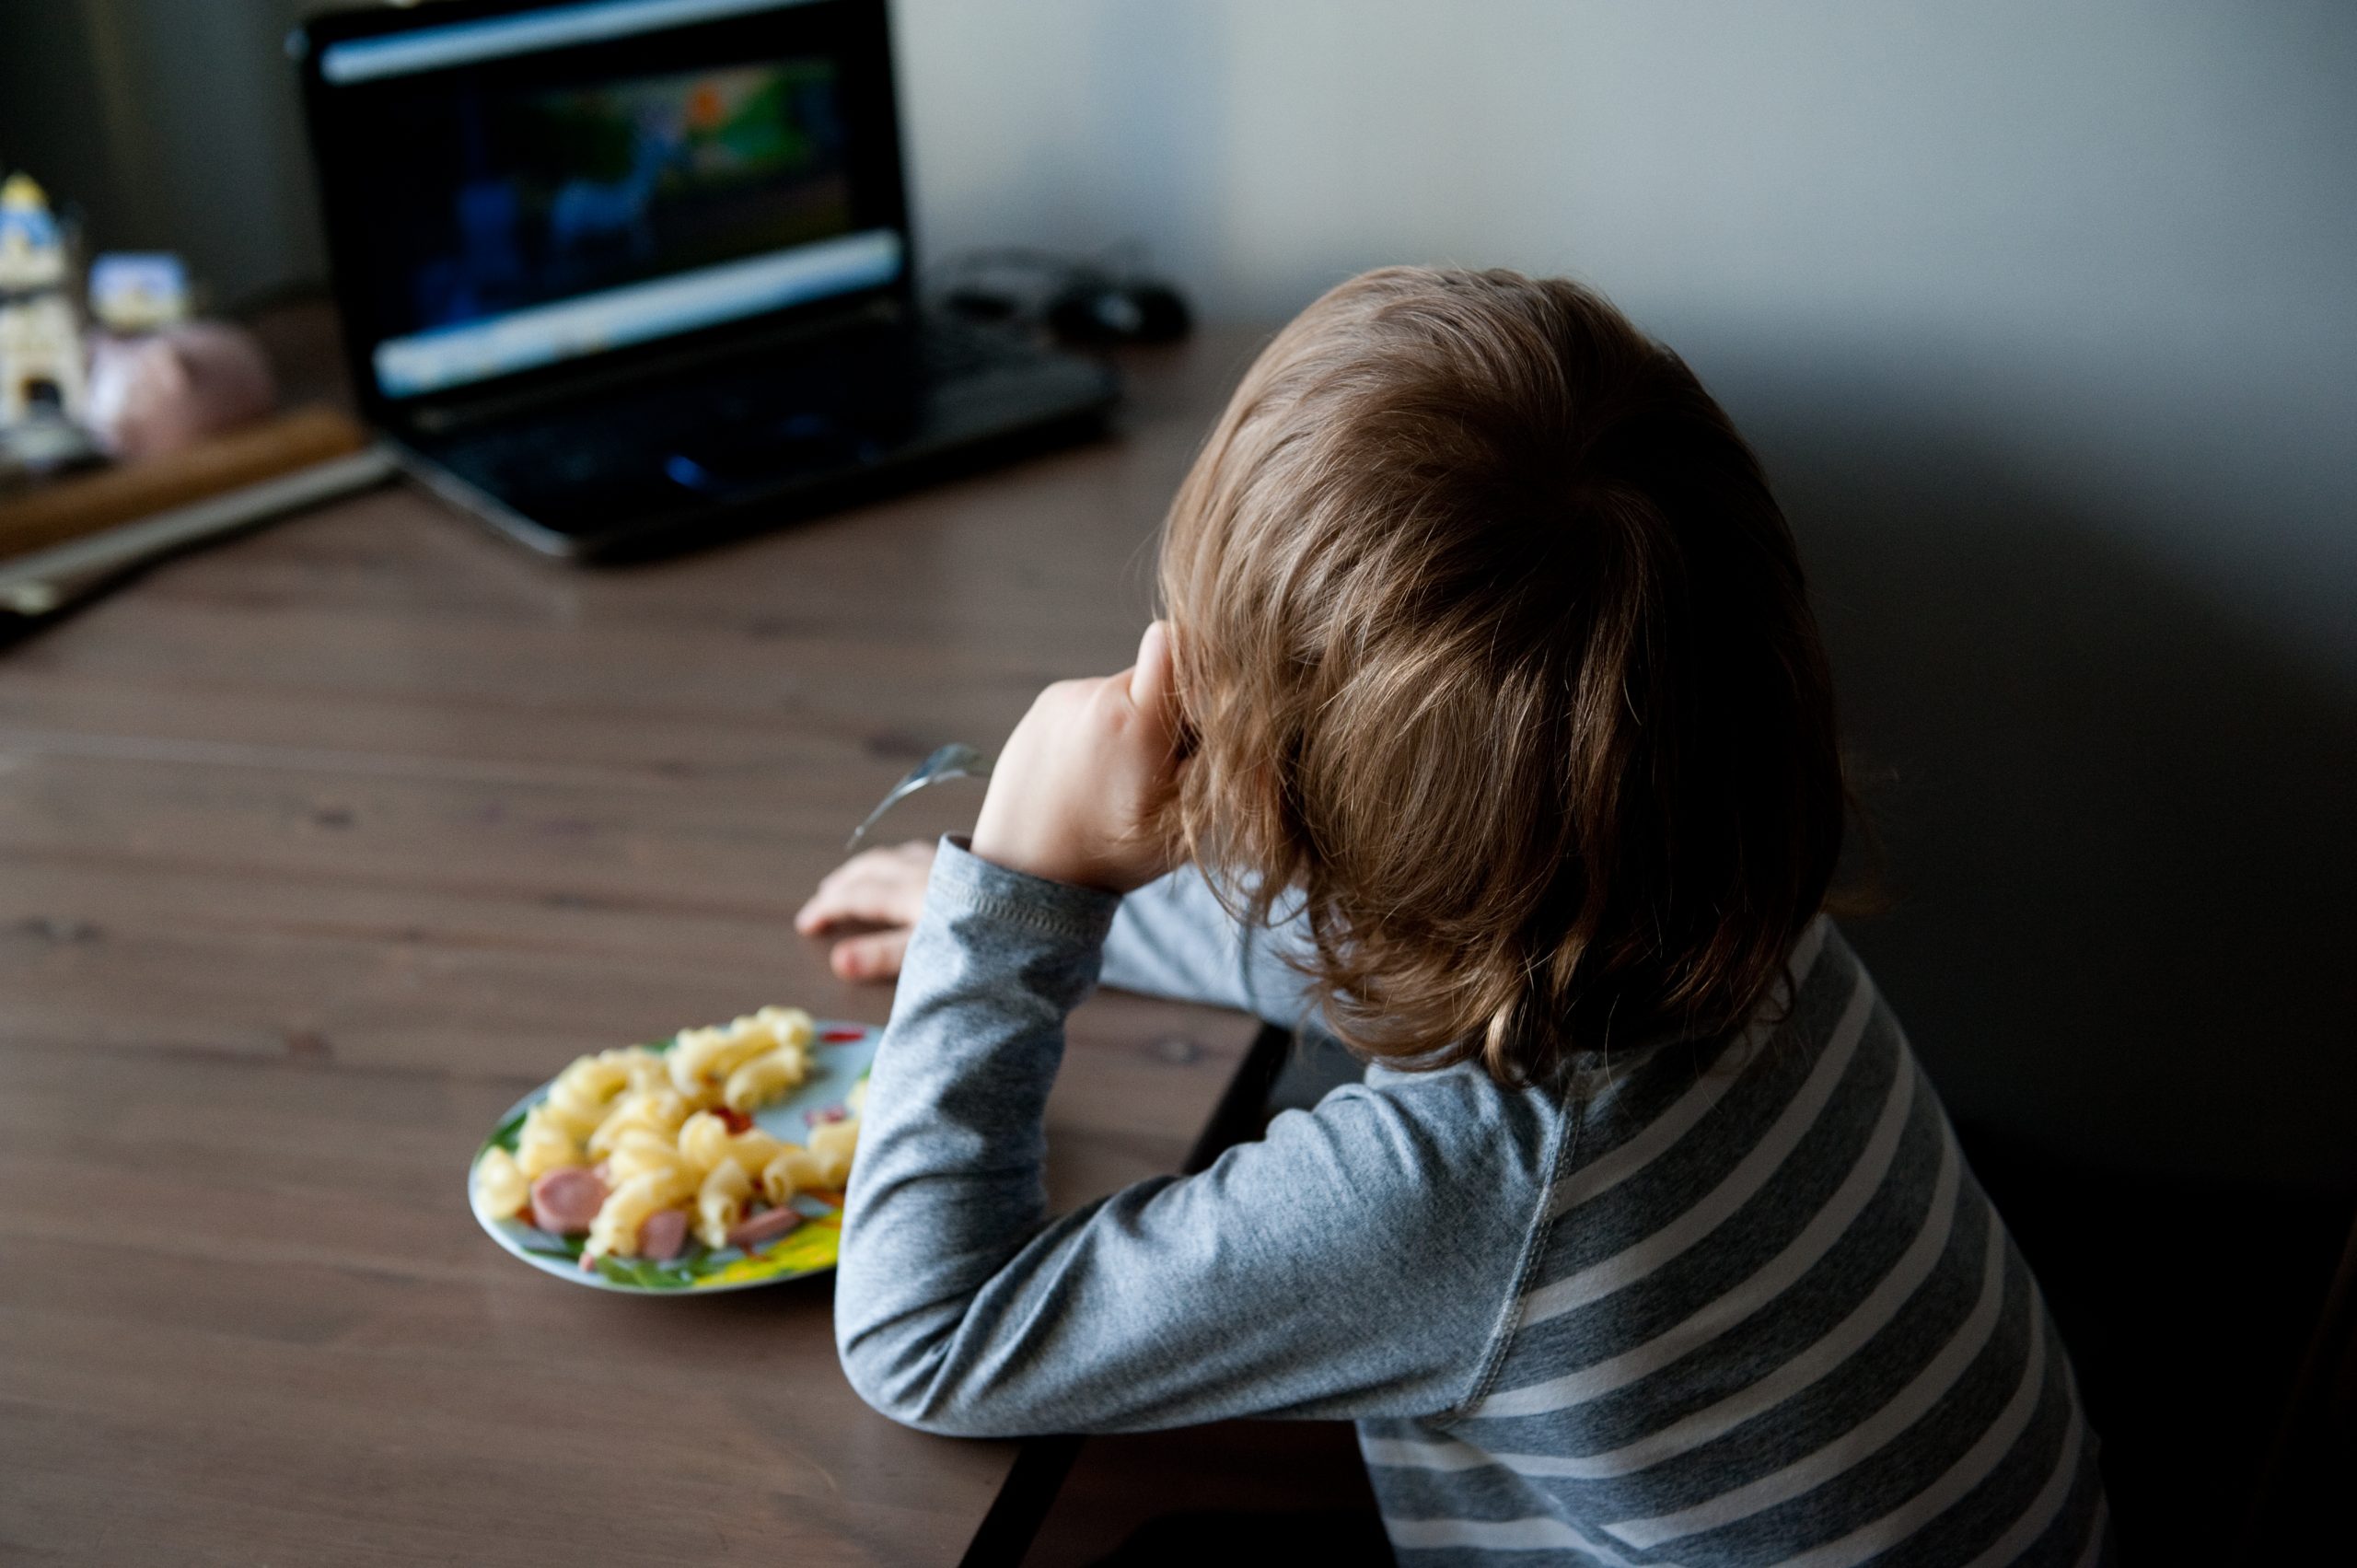 Screens and Child Cognitive Development: Exposure Time is Not the Only Factor to Consider